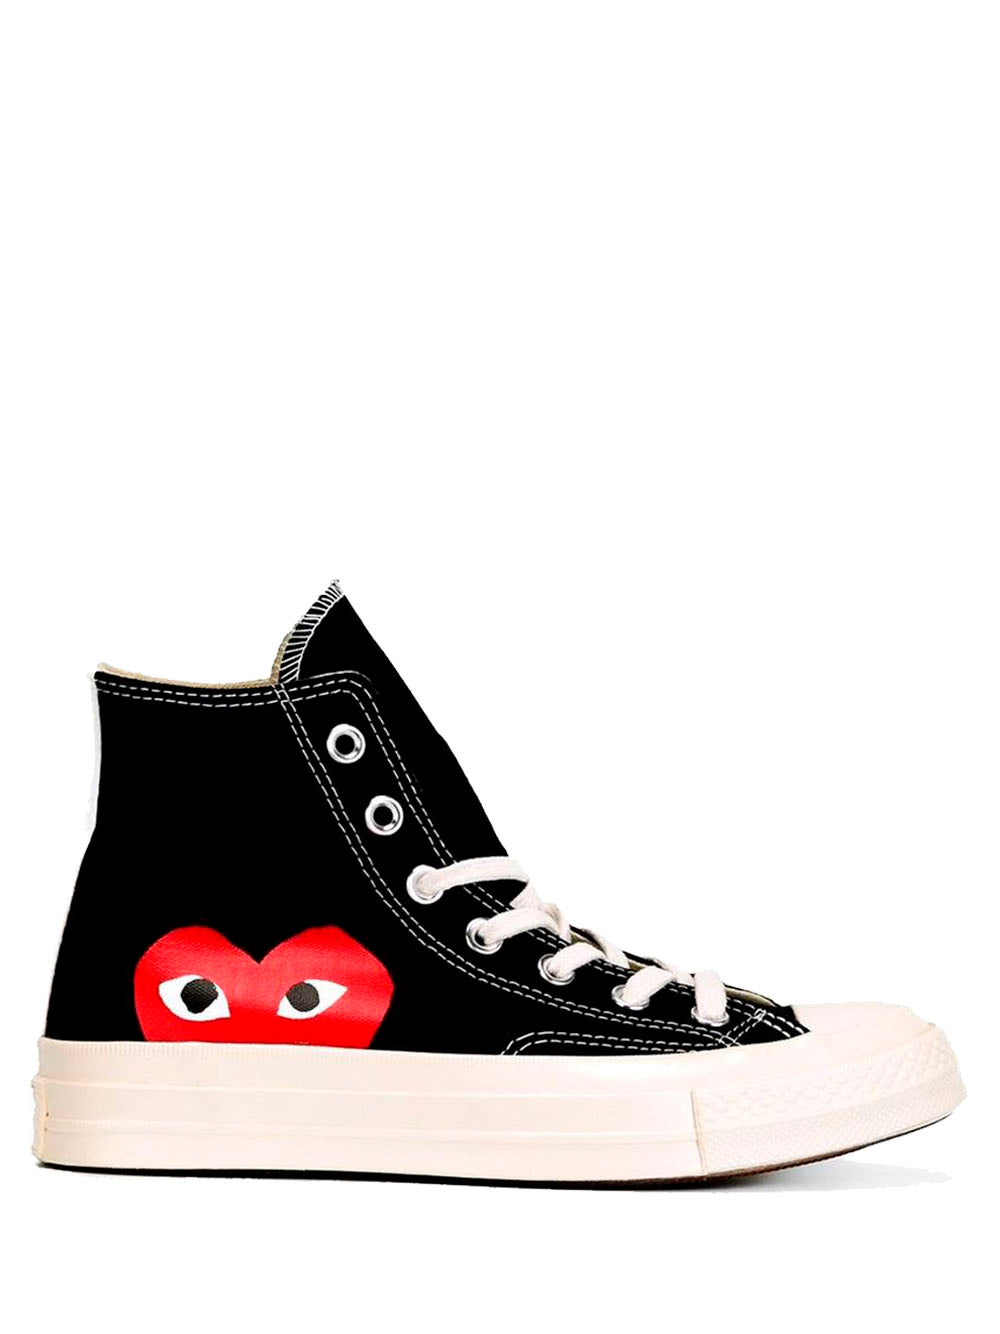 Converse High 'Chuck Taylor' Sneakers 